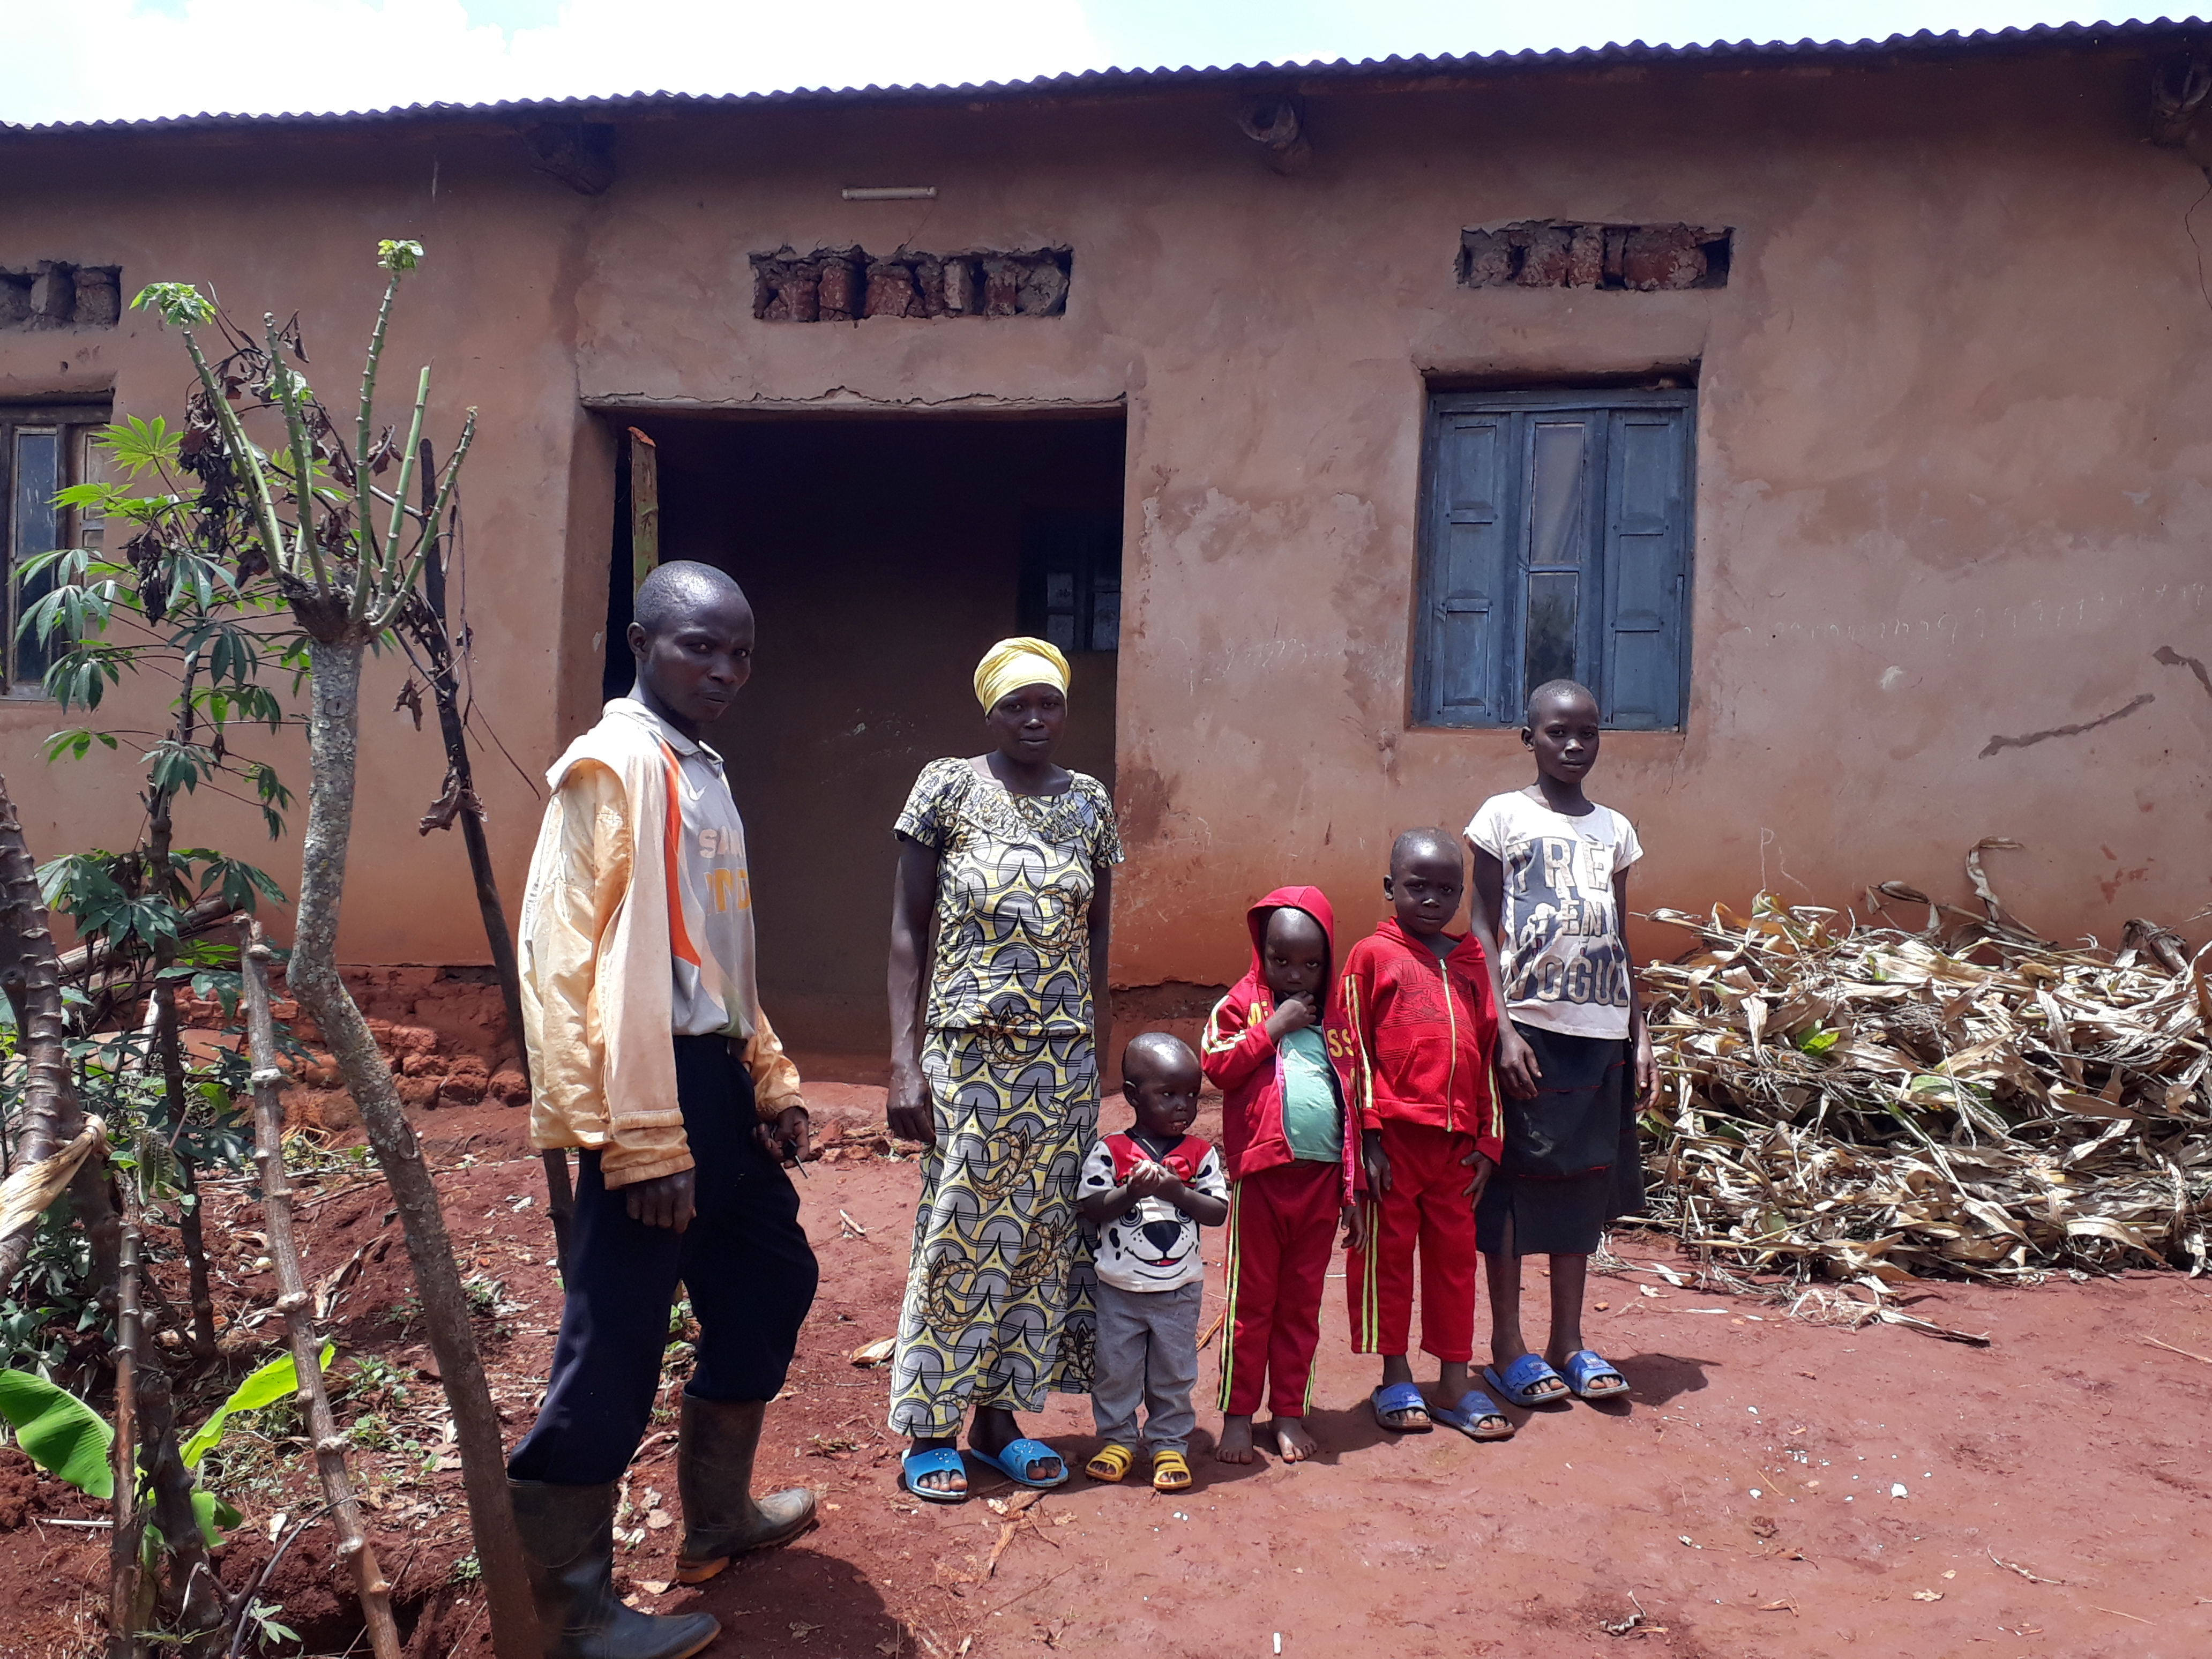 The solar panel Silas purchased with his new income from maize and bean sales at the local market keeps the lights on at his family home.